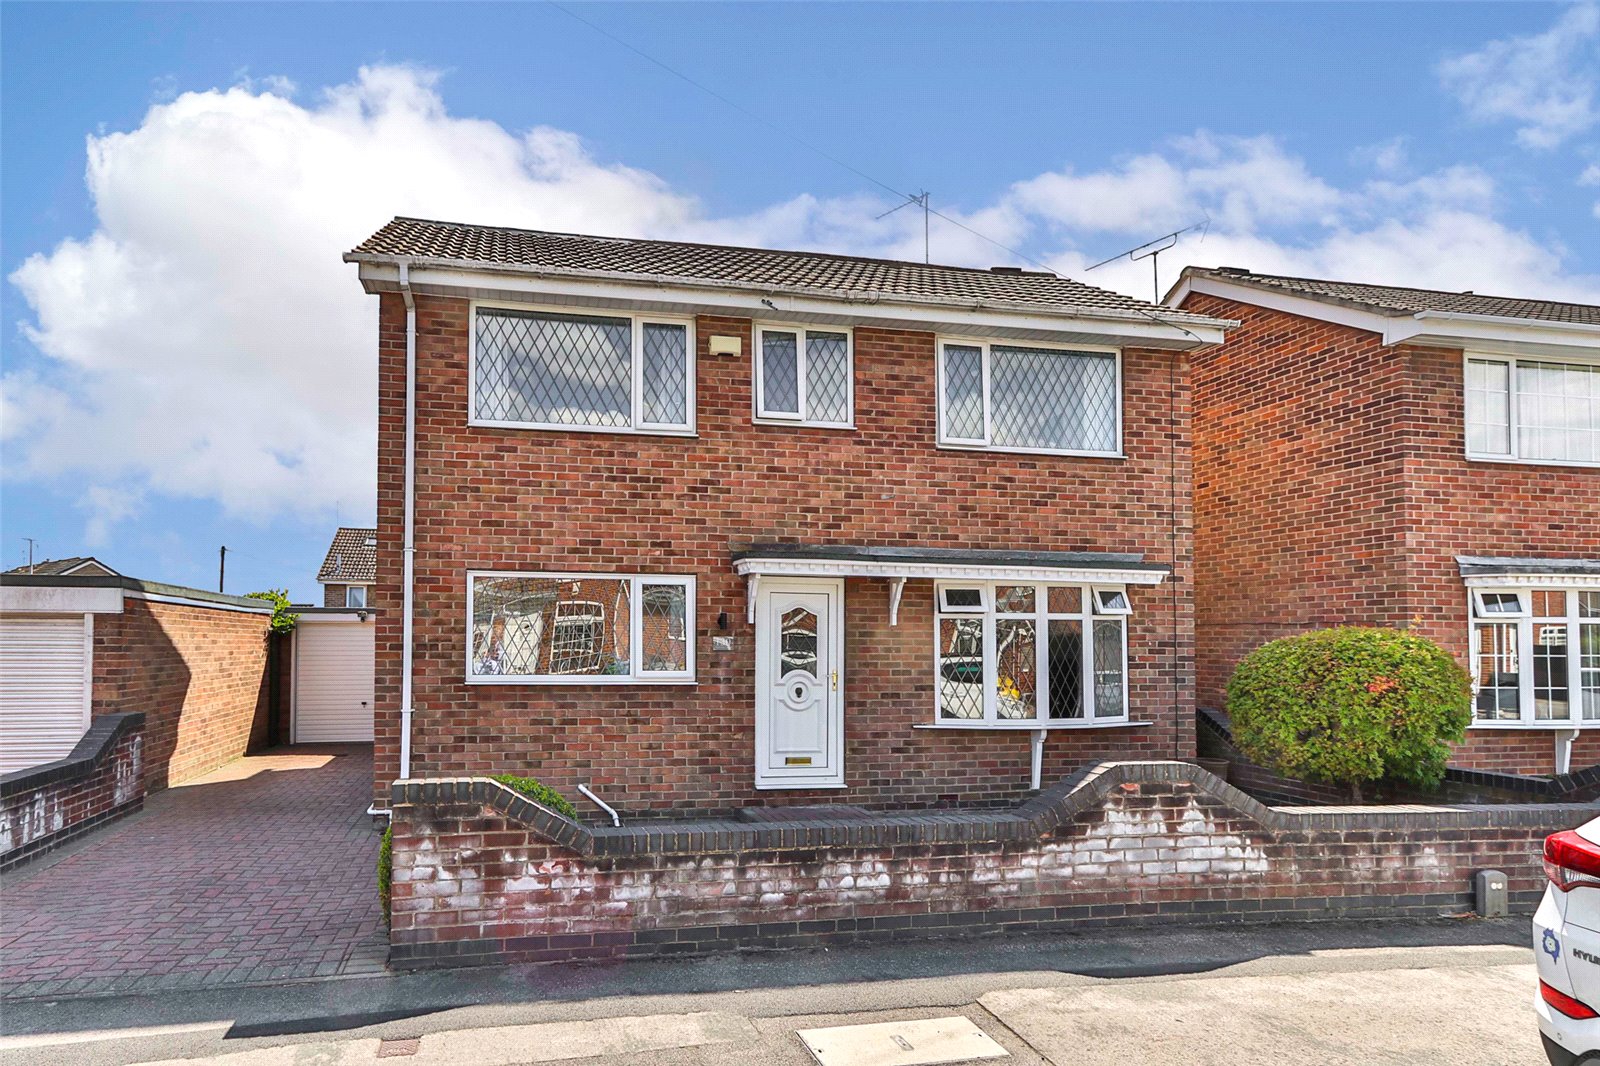 4 bed for sale in Maplewood Avenue, Hull, HU5 